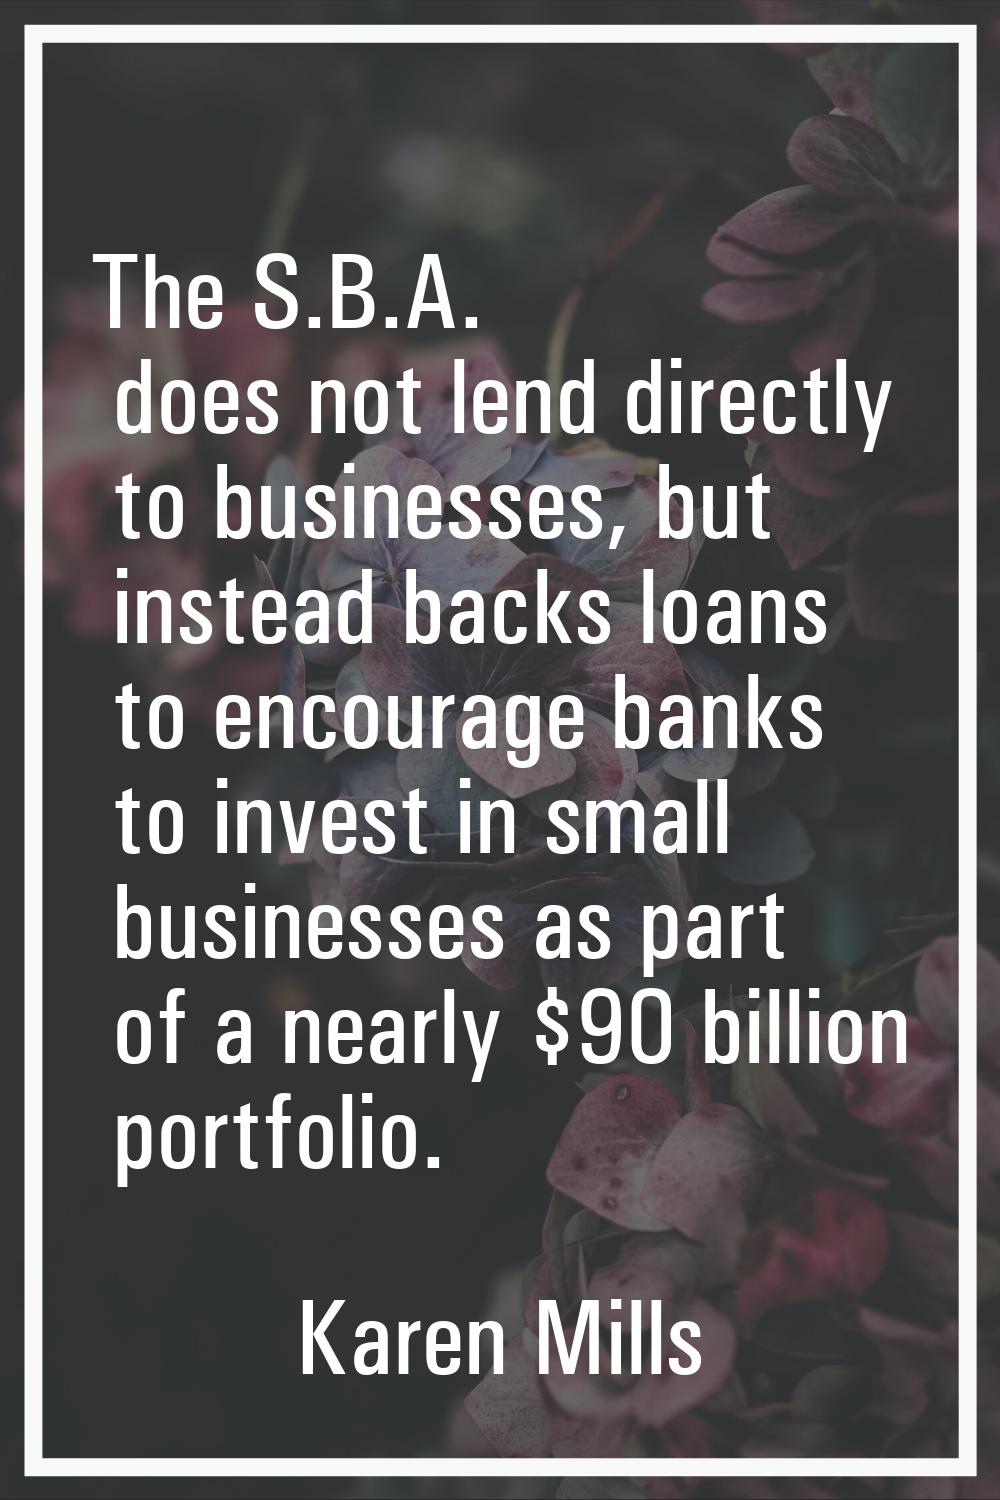 The S.B.A. does not lend directly to businesses, but instead backs loans to encourage banks to inve